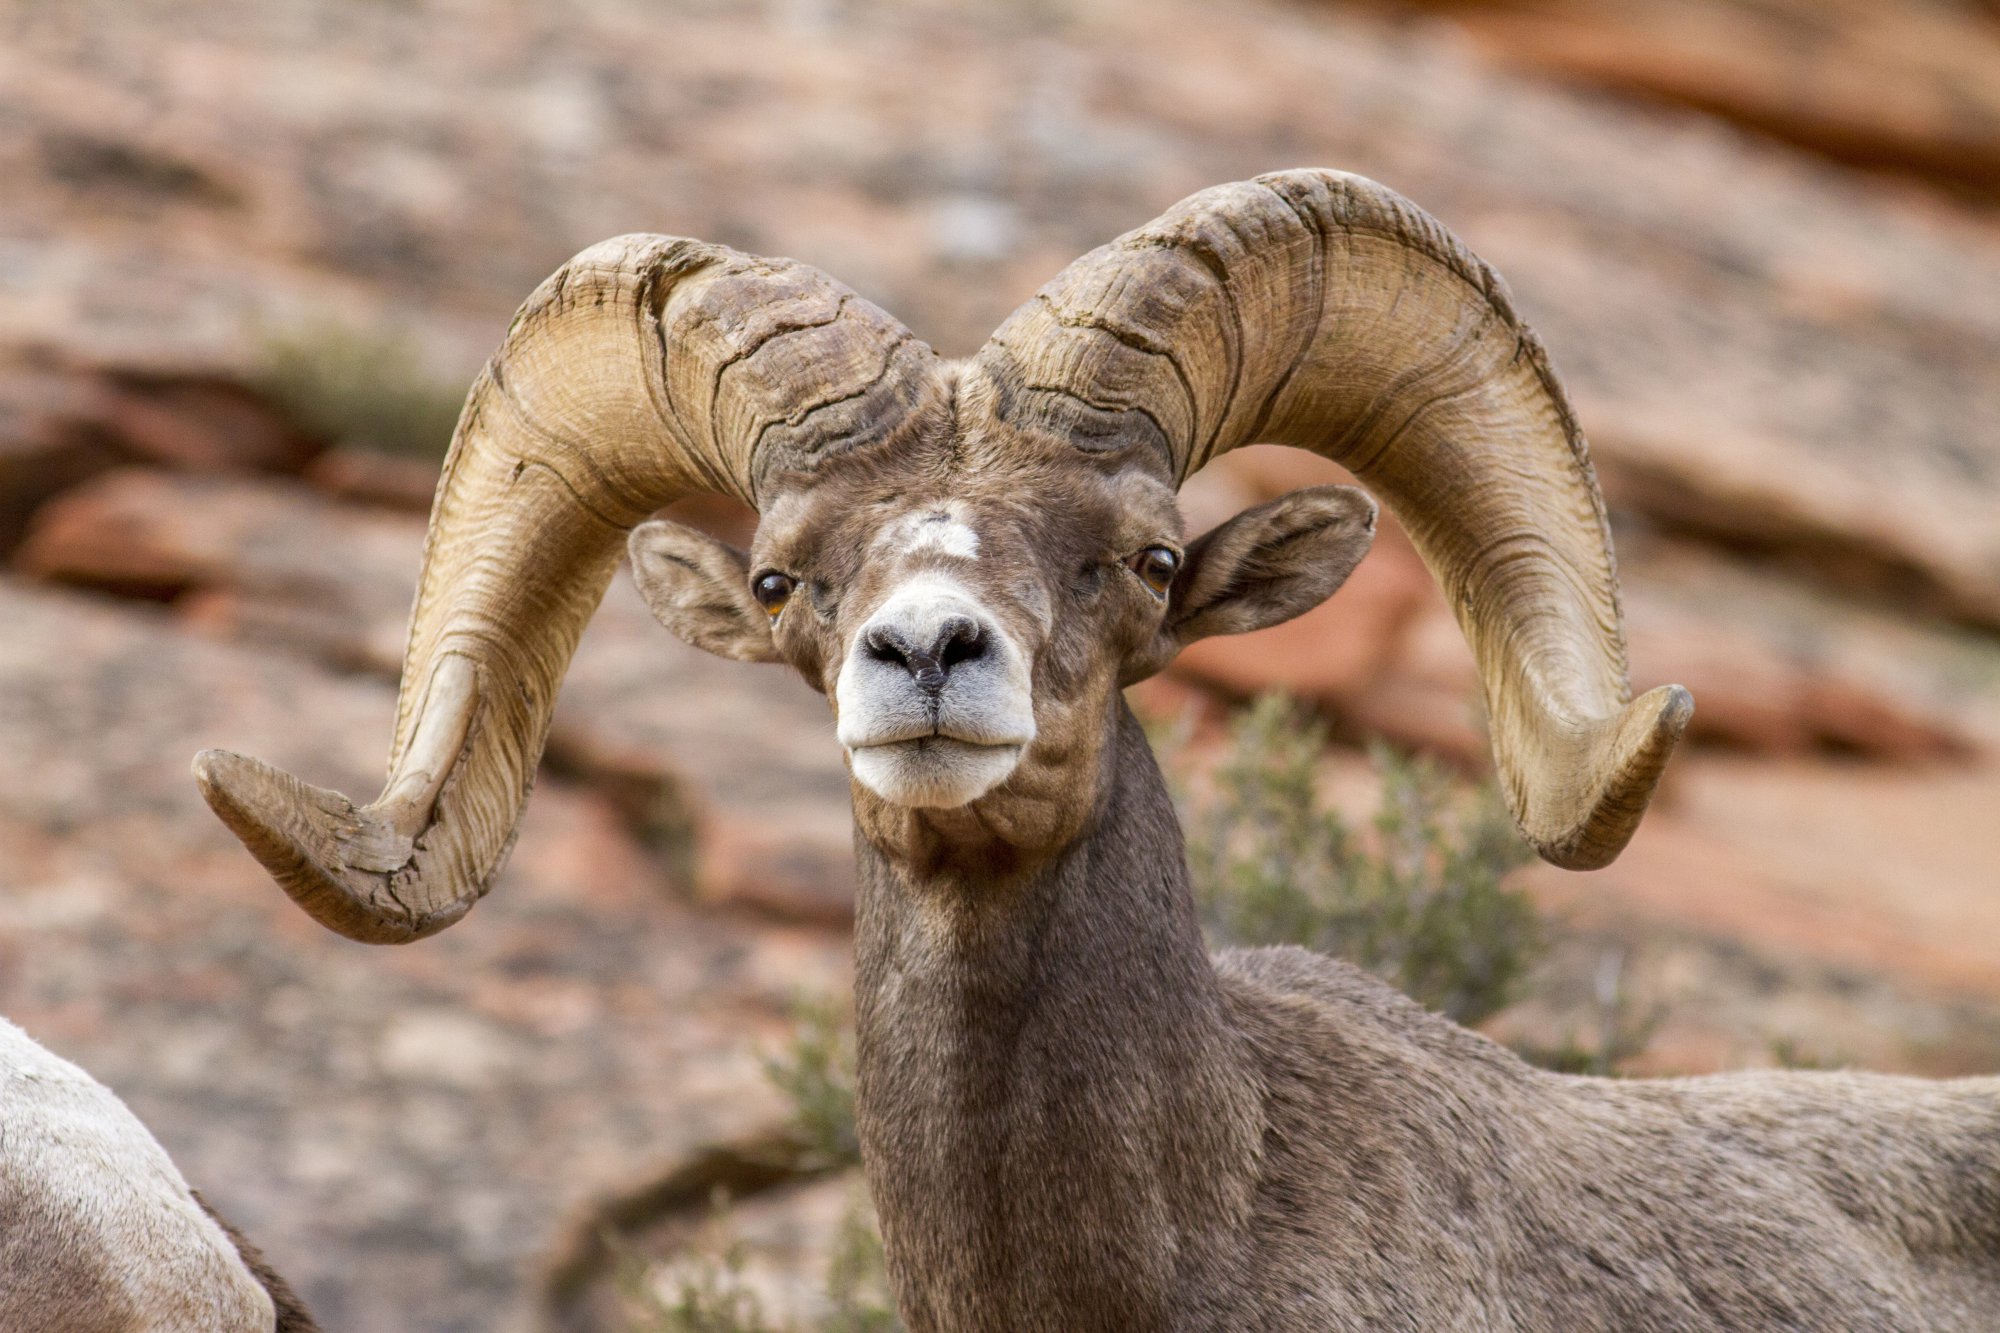 Hunting guide found guilty for allegedly poaching bighorn sheep in ...